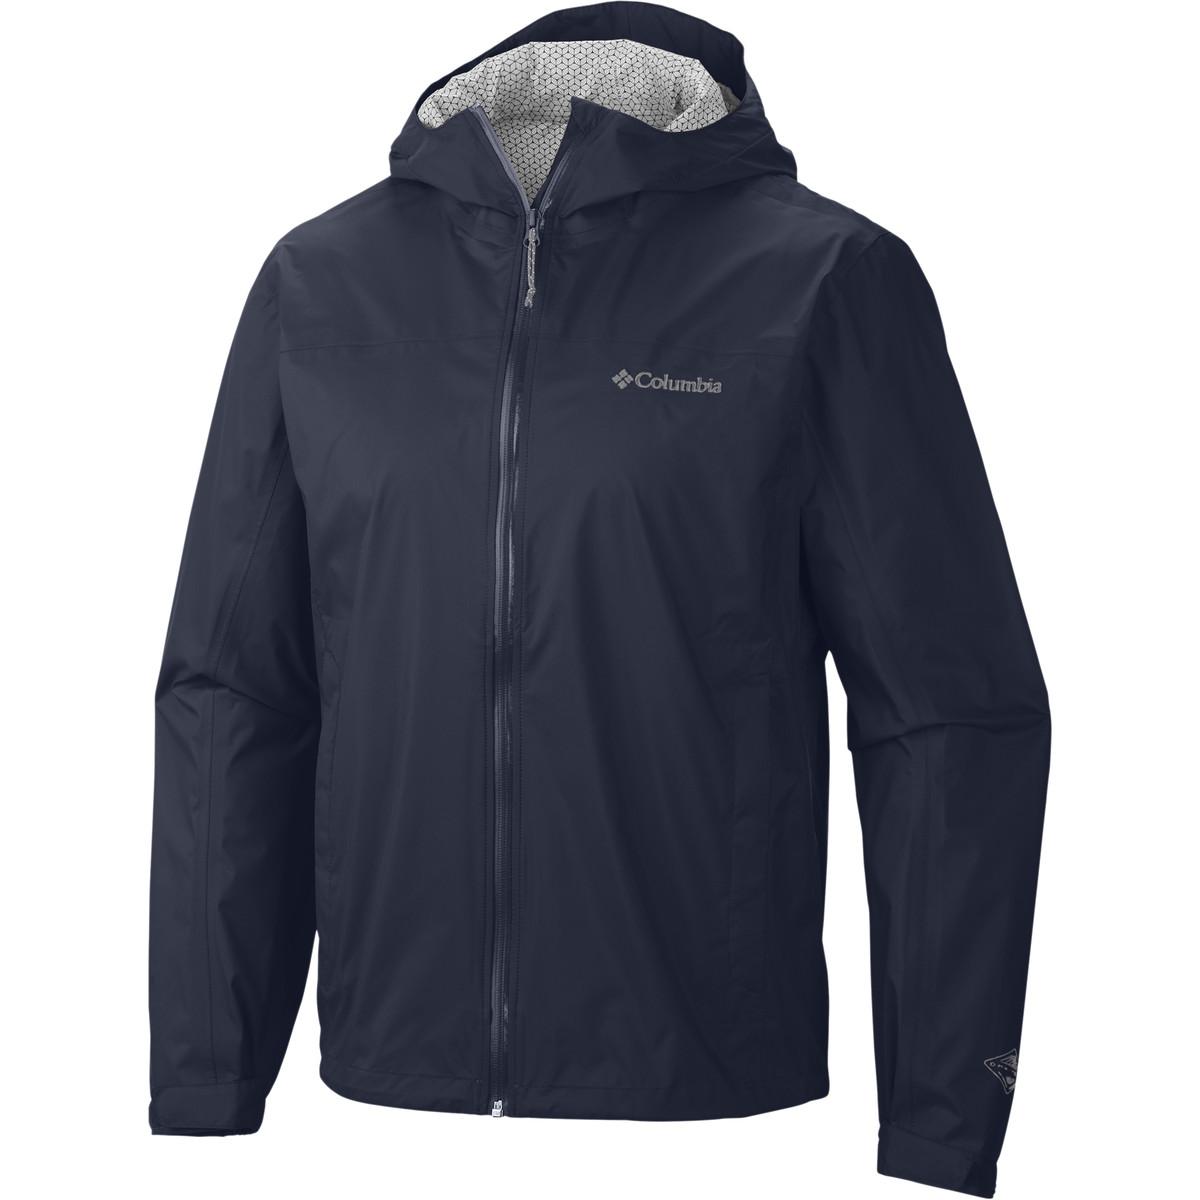 Columbia Evapouration Jacket in Blue for Men - Lyst